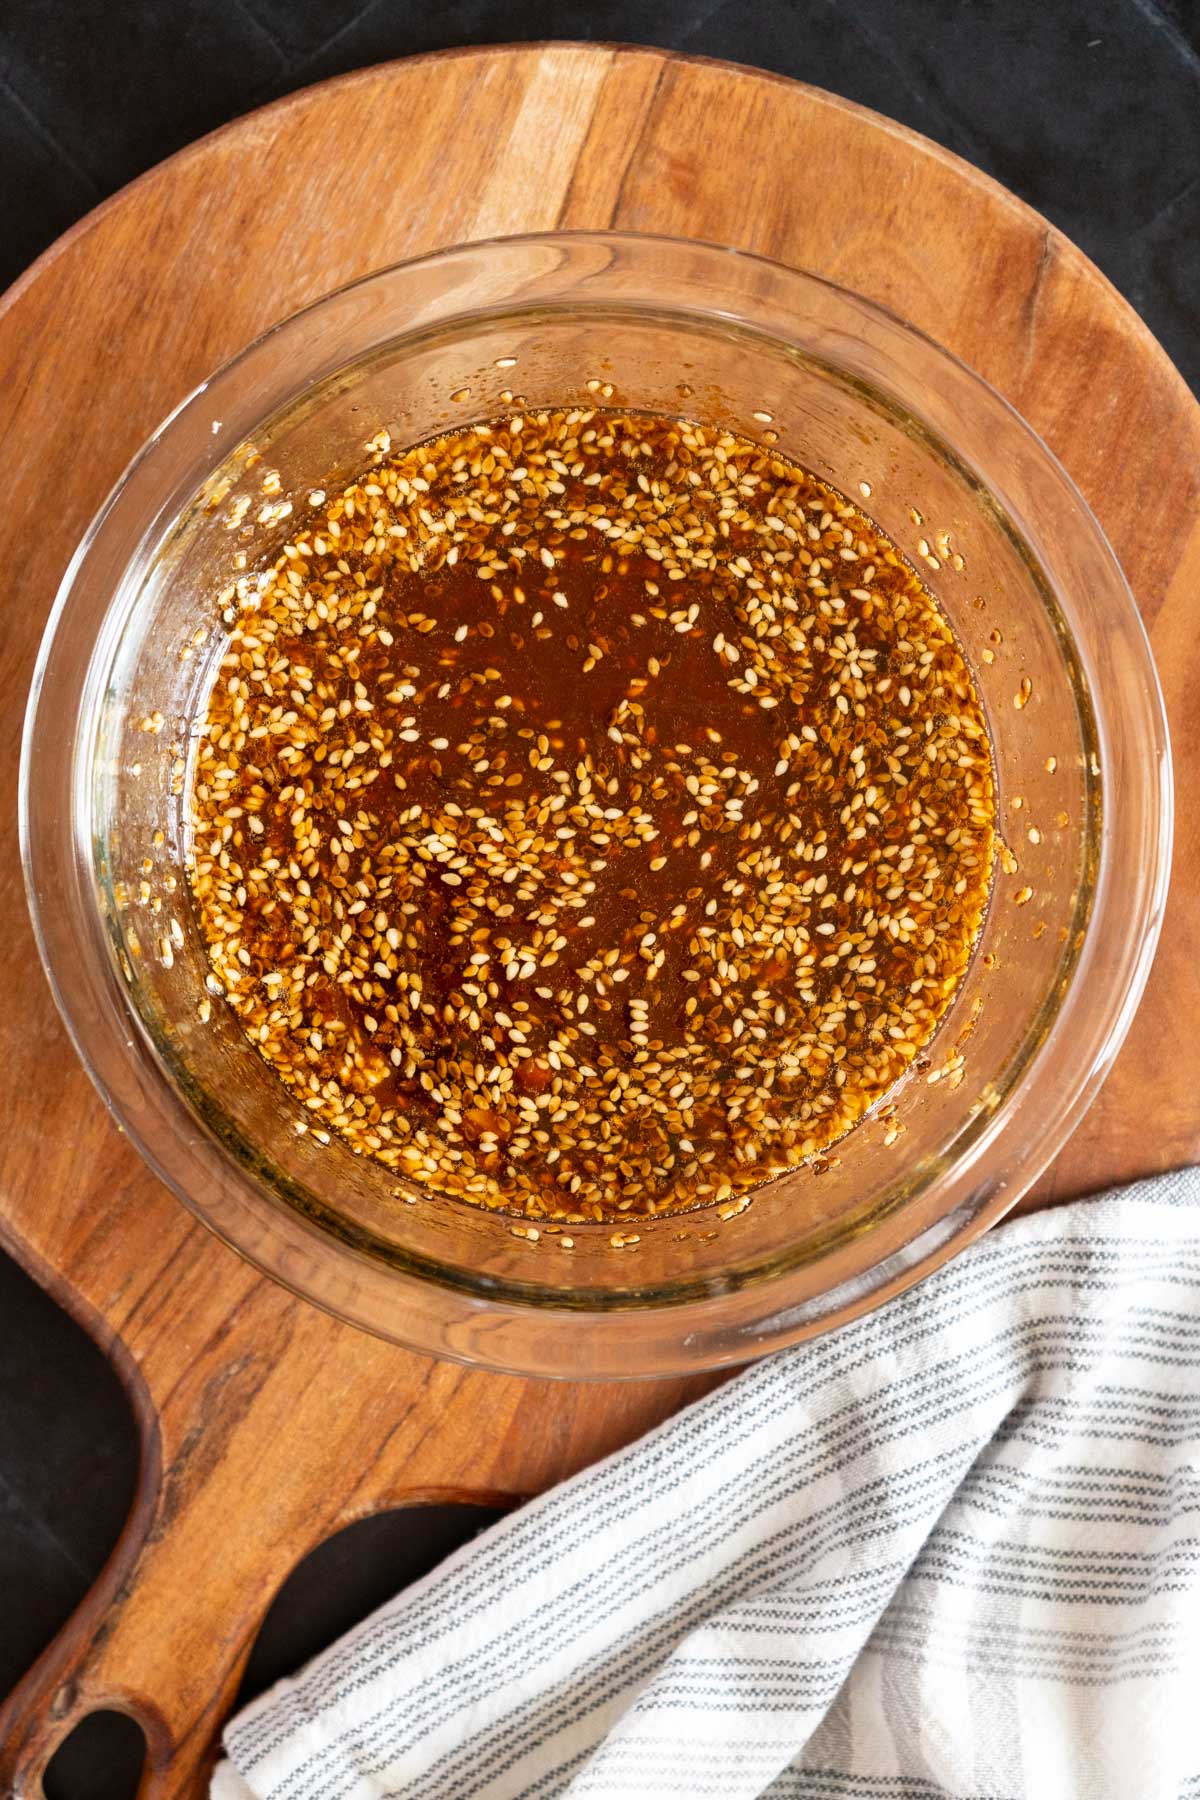 Sesame seeds and other ingredients in a bowl.